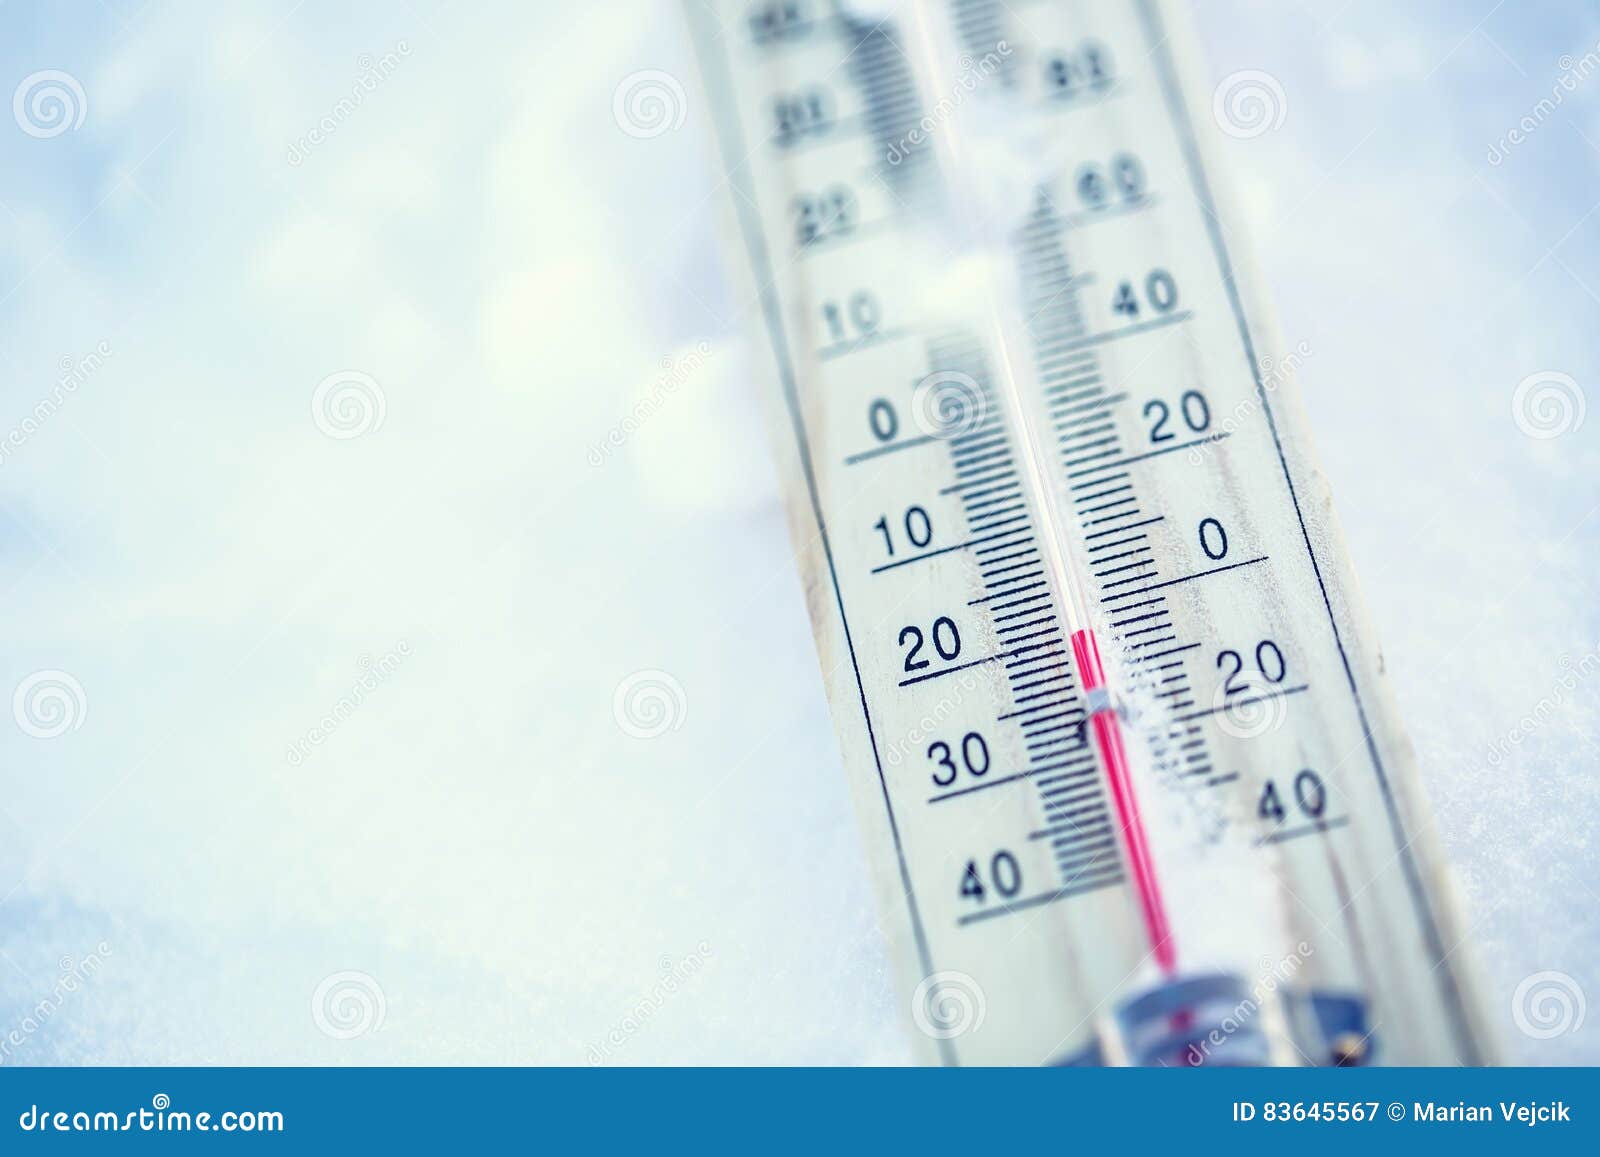 thermometer on snow shows low temperatures under zero. low temperatures in degrees celsius and fahrenheit.